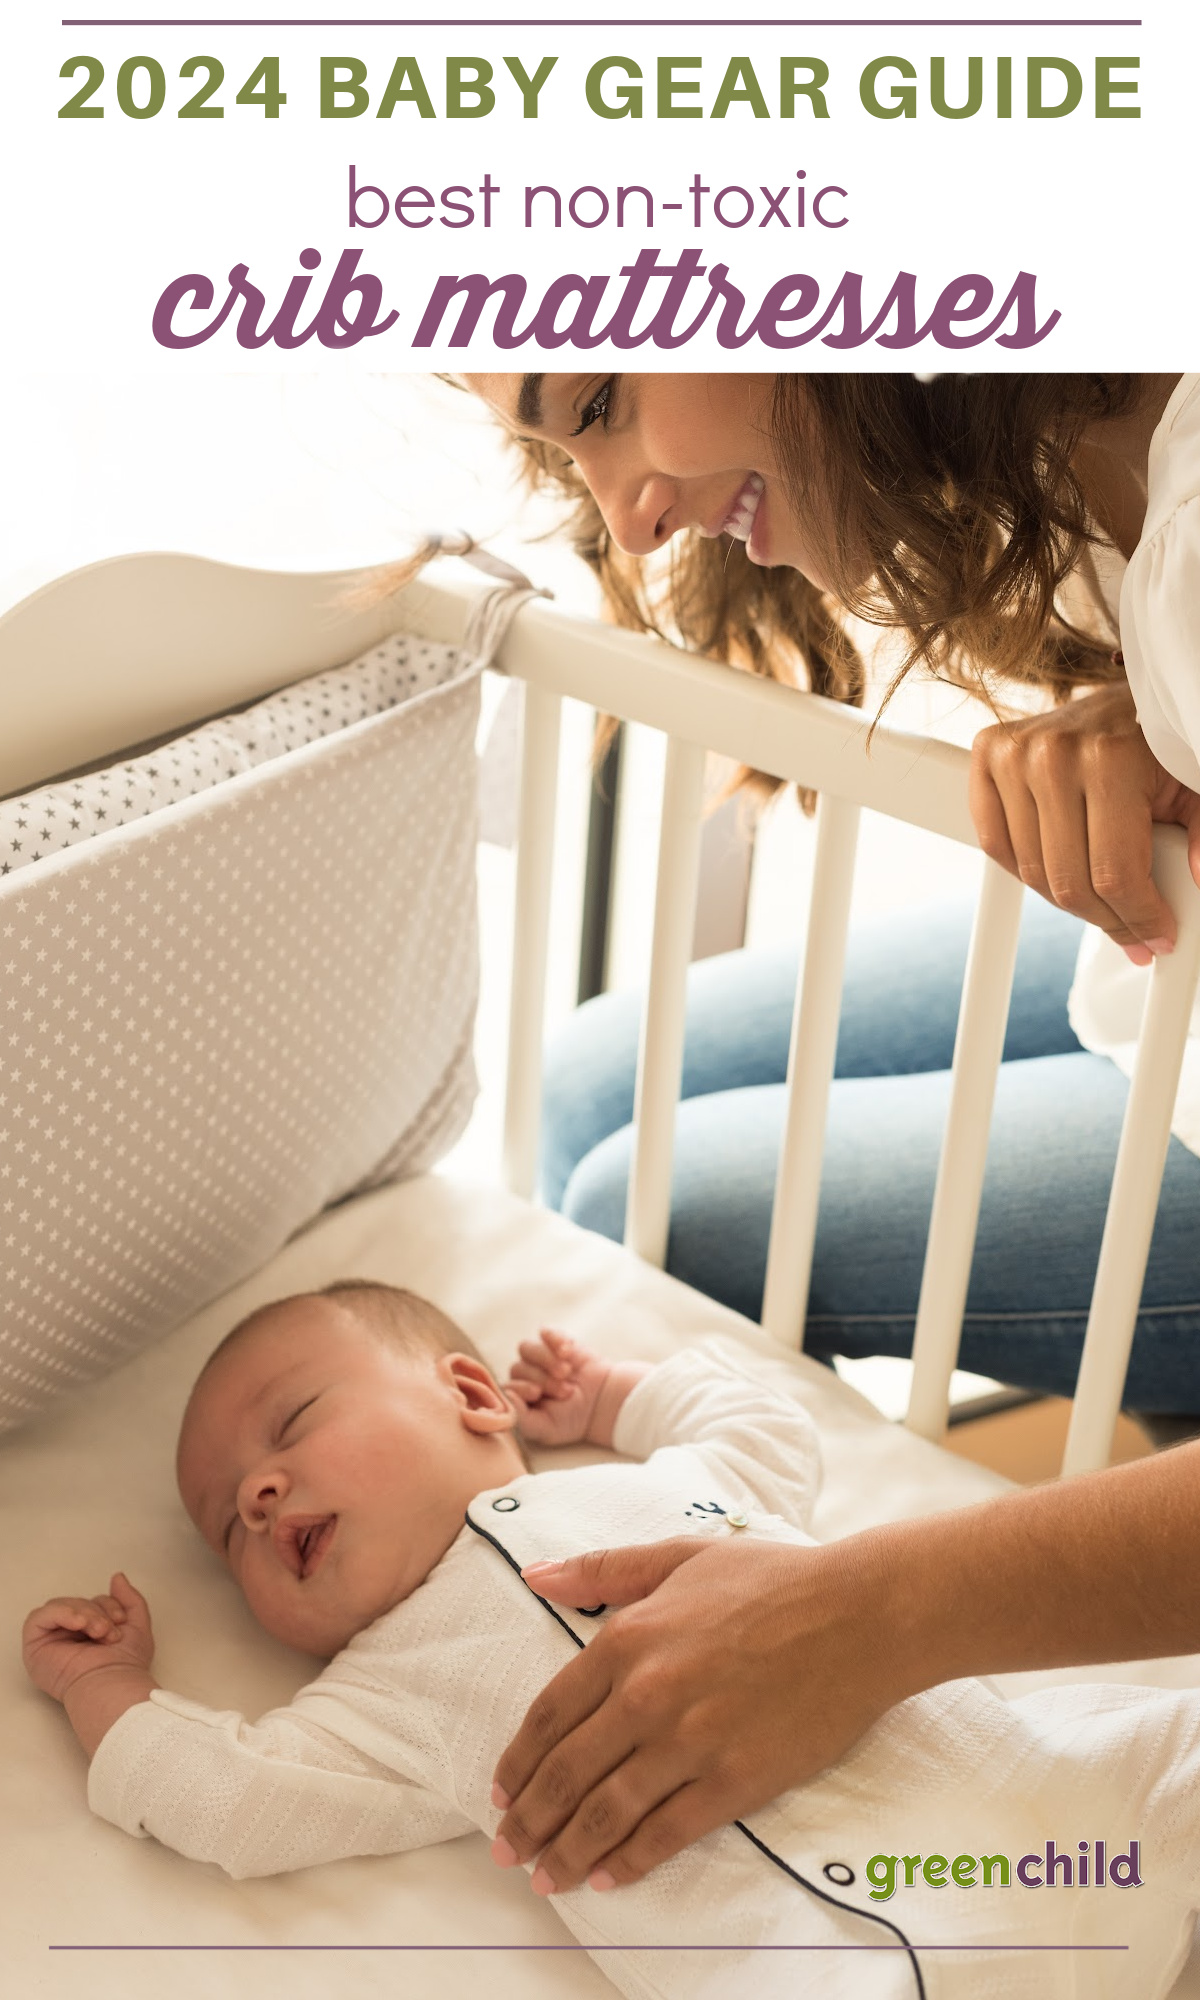 Are Breathable Crib Mattresses Safer For Babies Than Regular Ones?